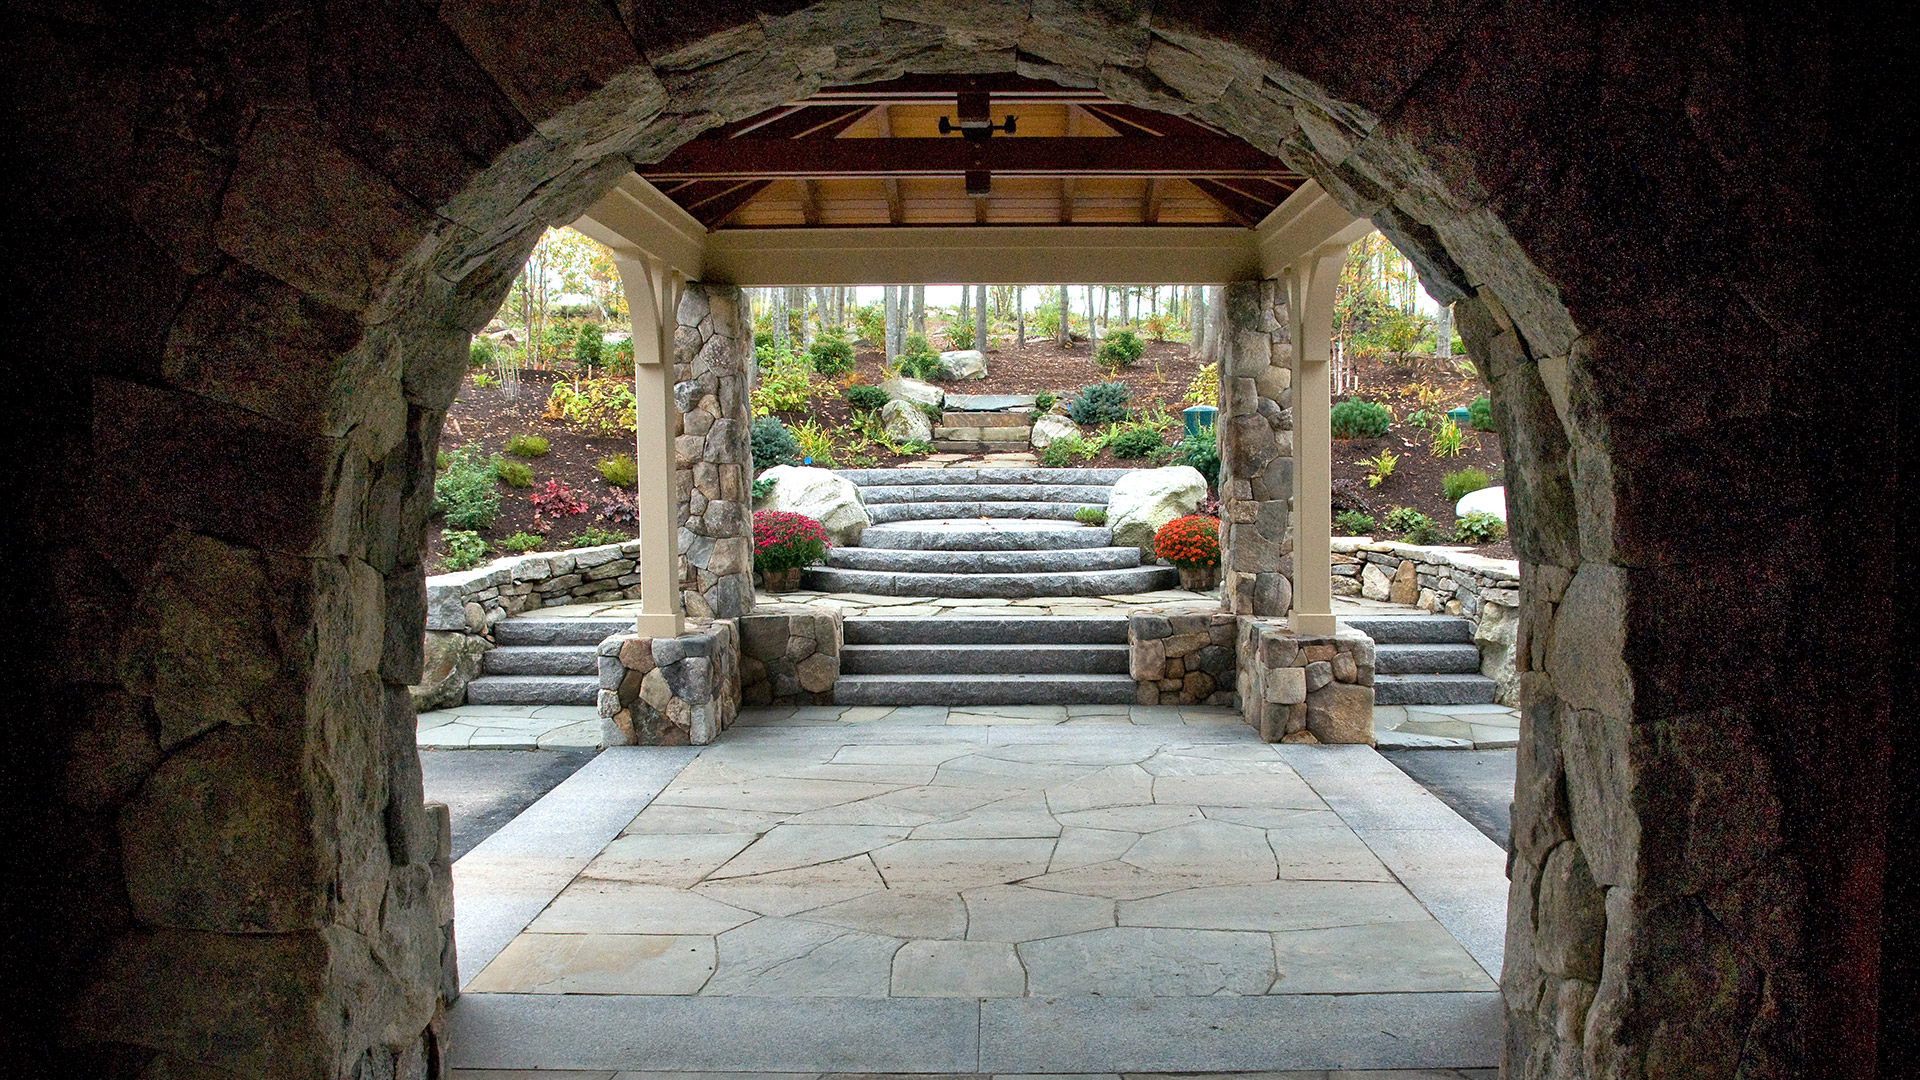 Lake Wentworth, New Hampshire stone arched entry